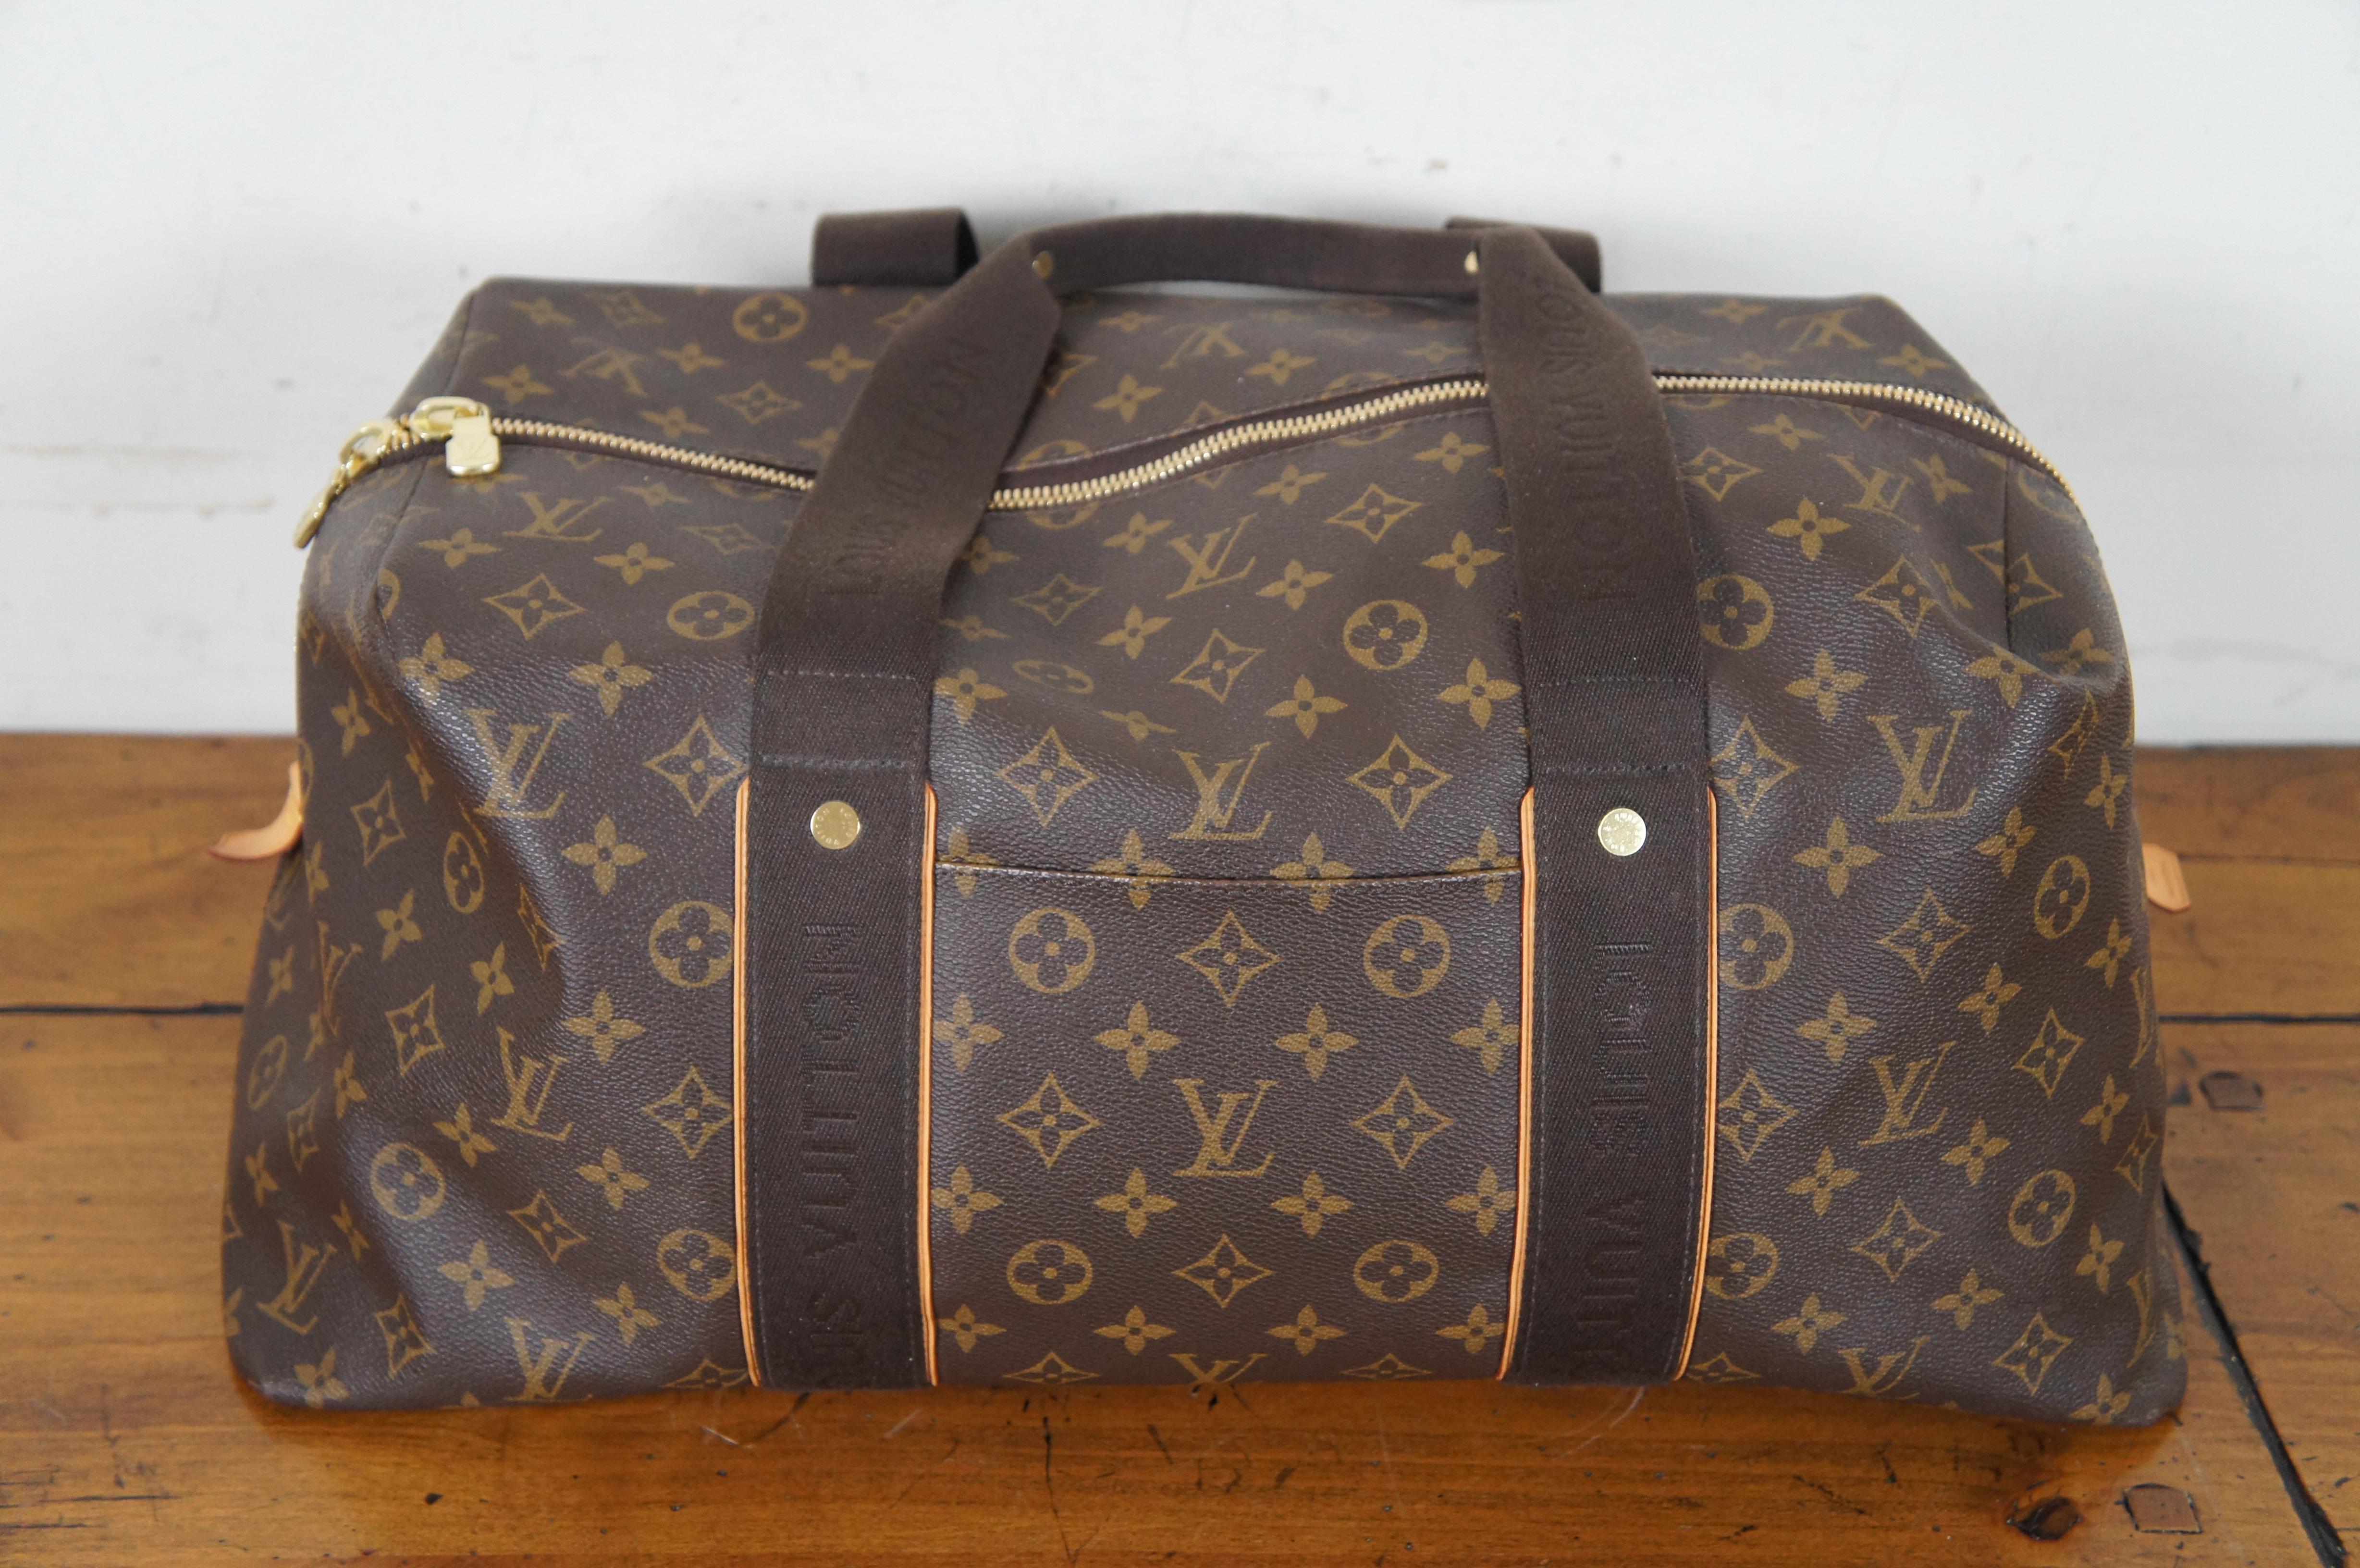 Vintage Louis Vuitton Beaubourg Weekender LV Monogram Canvas Bag France DU2161 In Good Condition For Sale In Dayton, OH